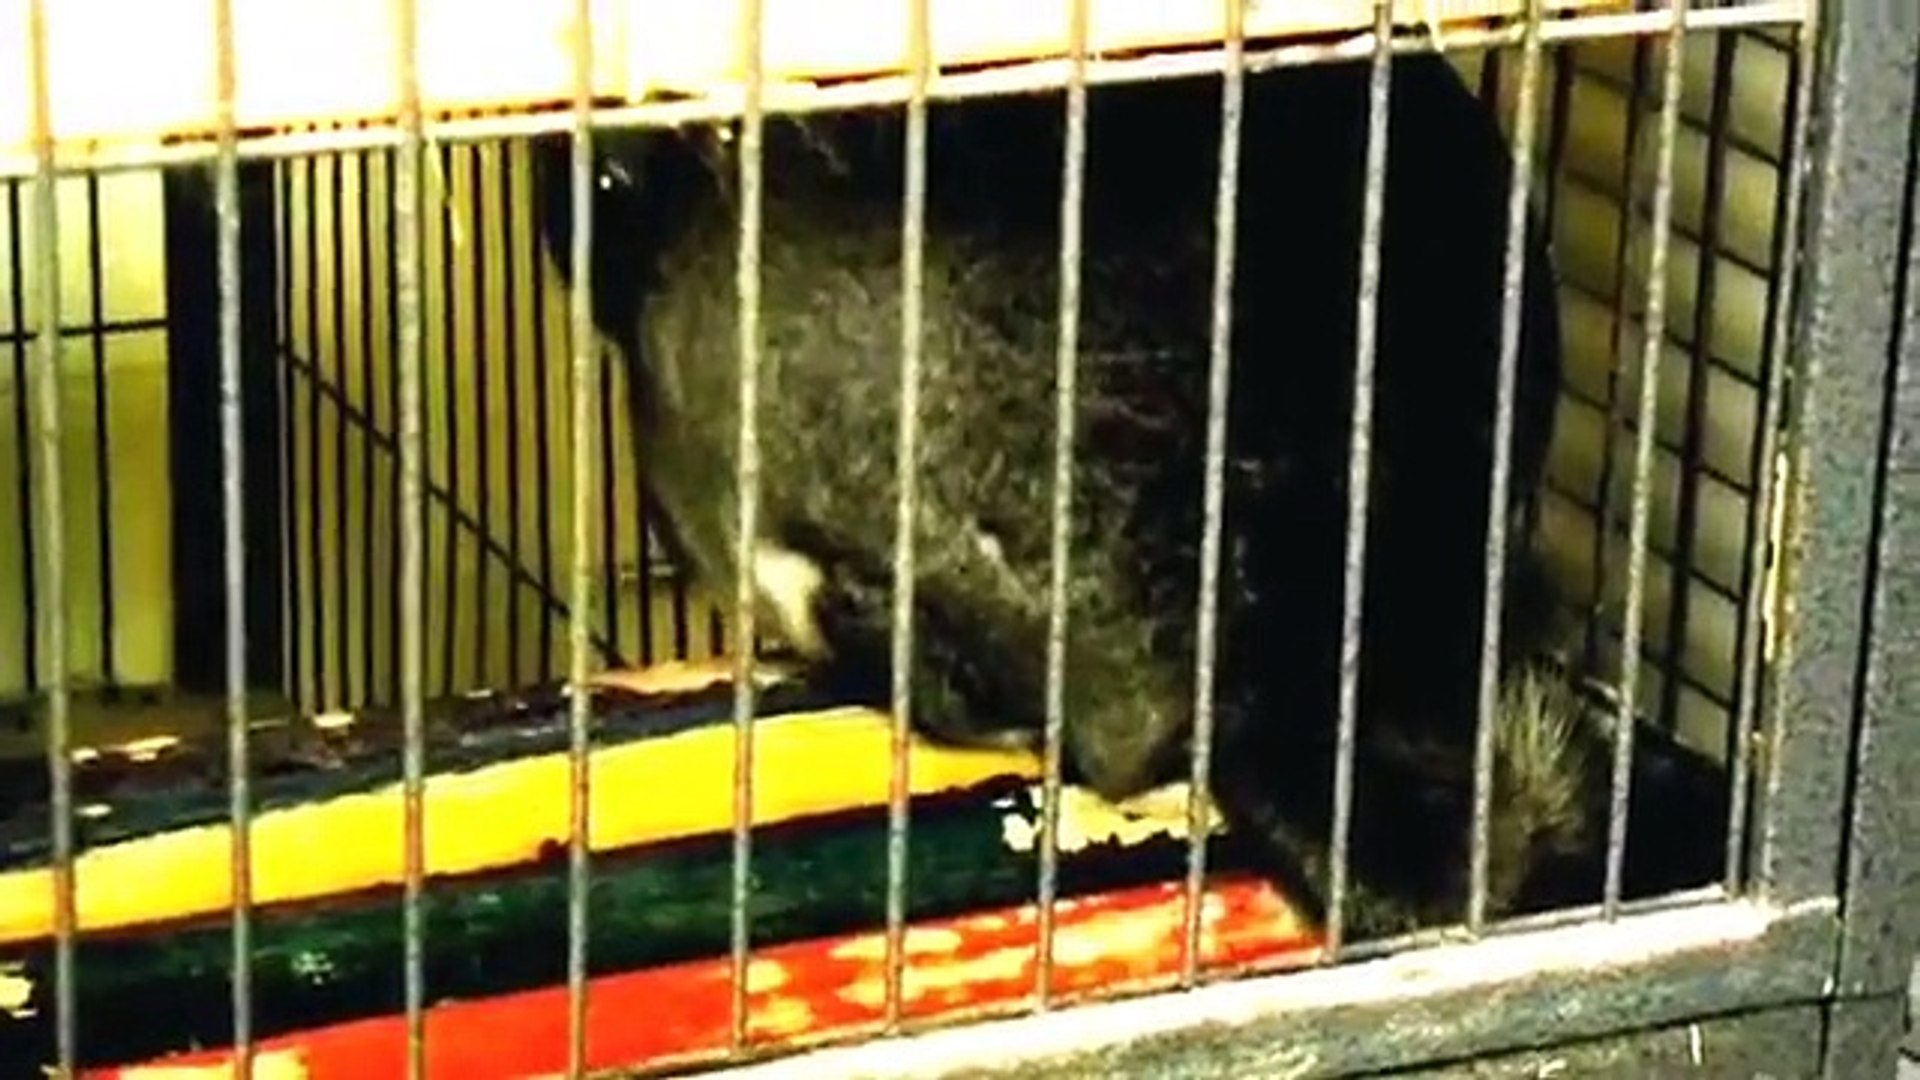 A Day In The Life Of A Chinchilla - Speedy